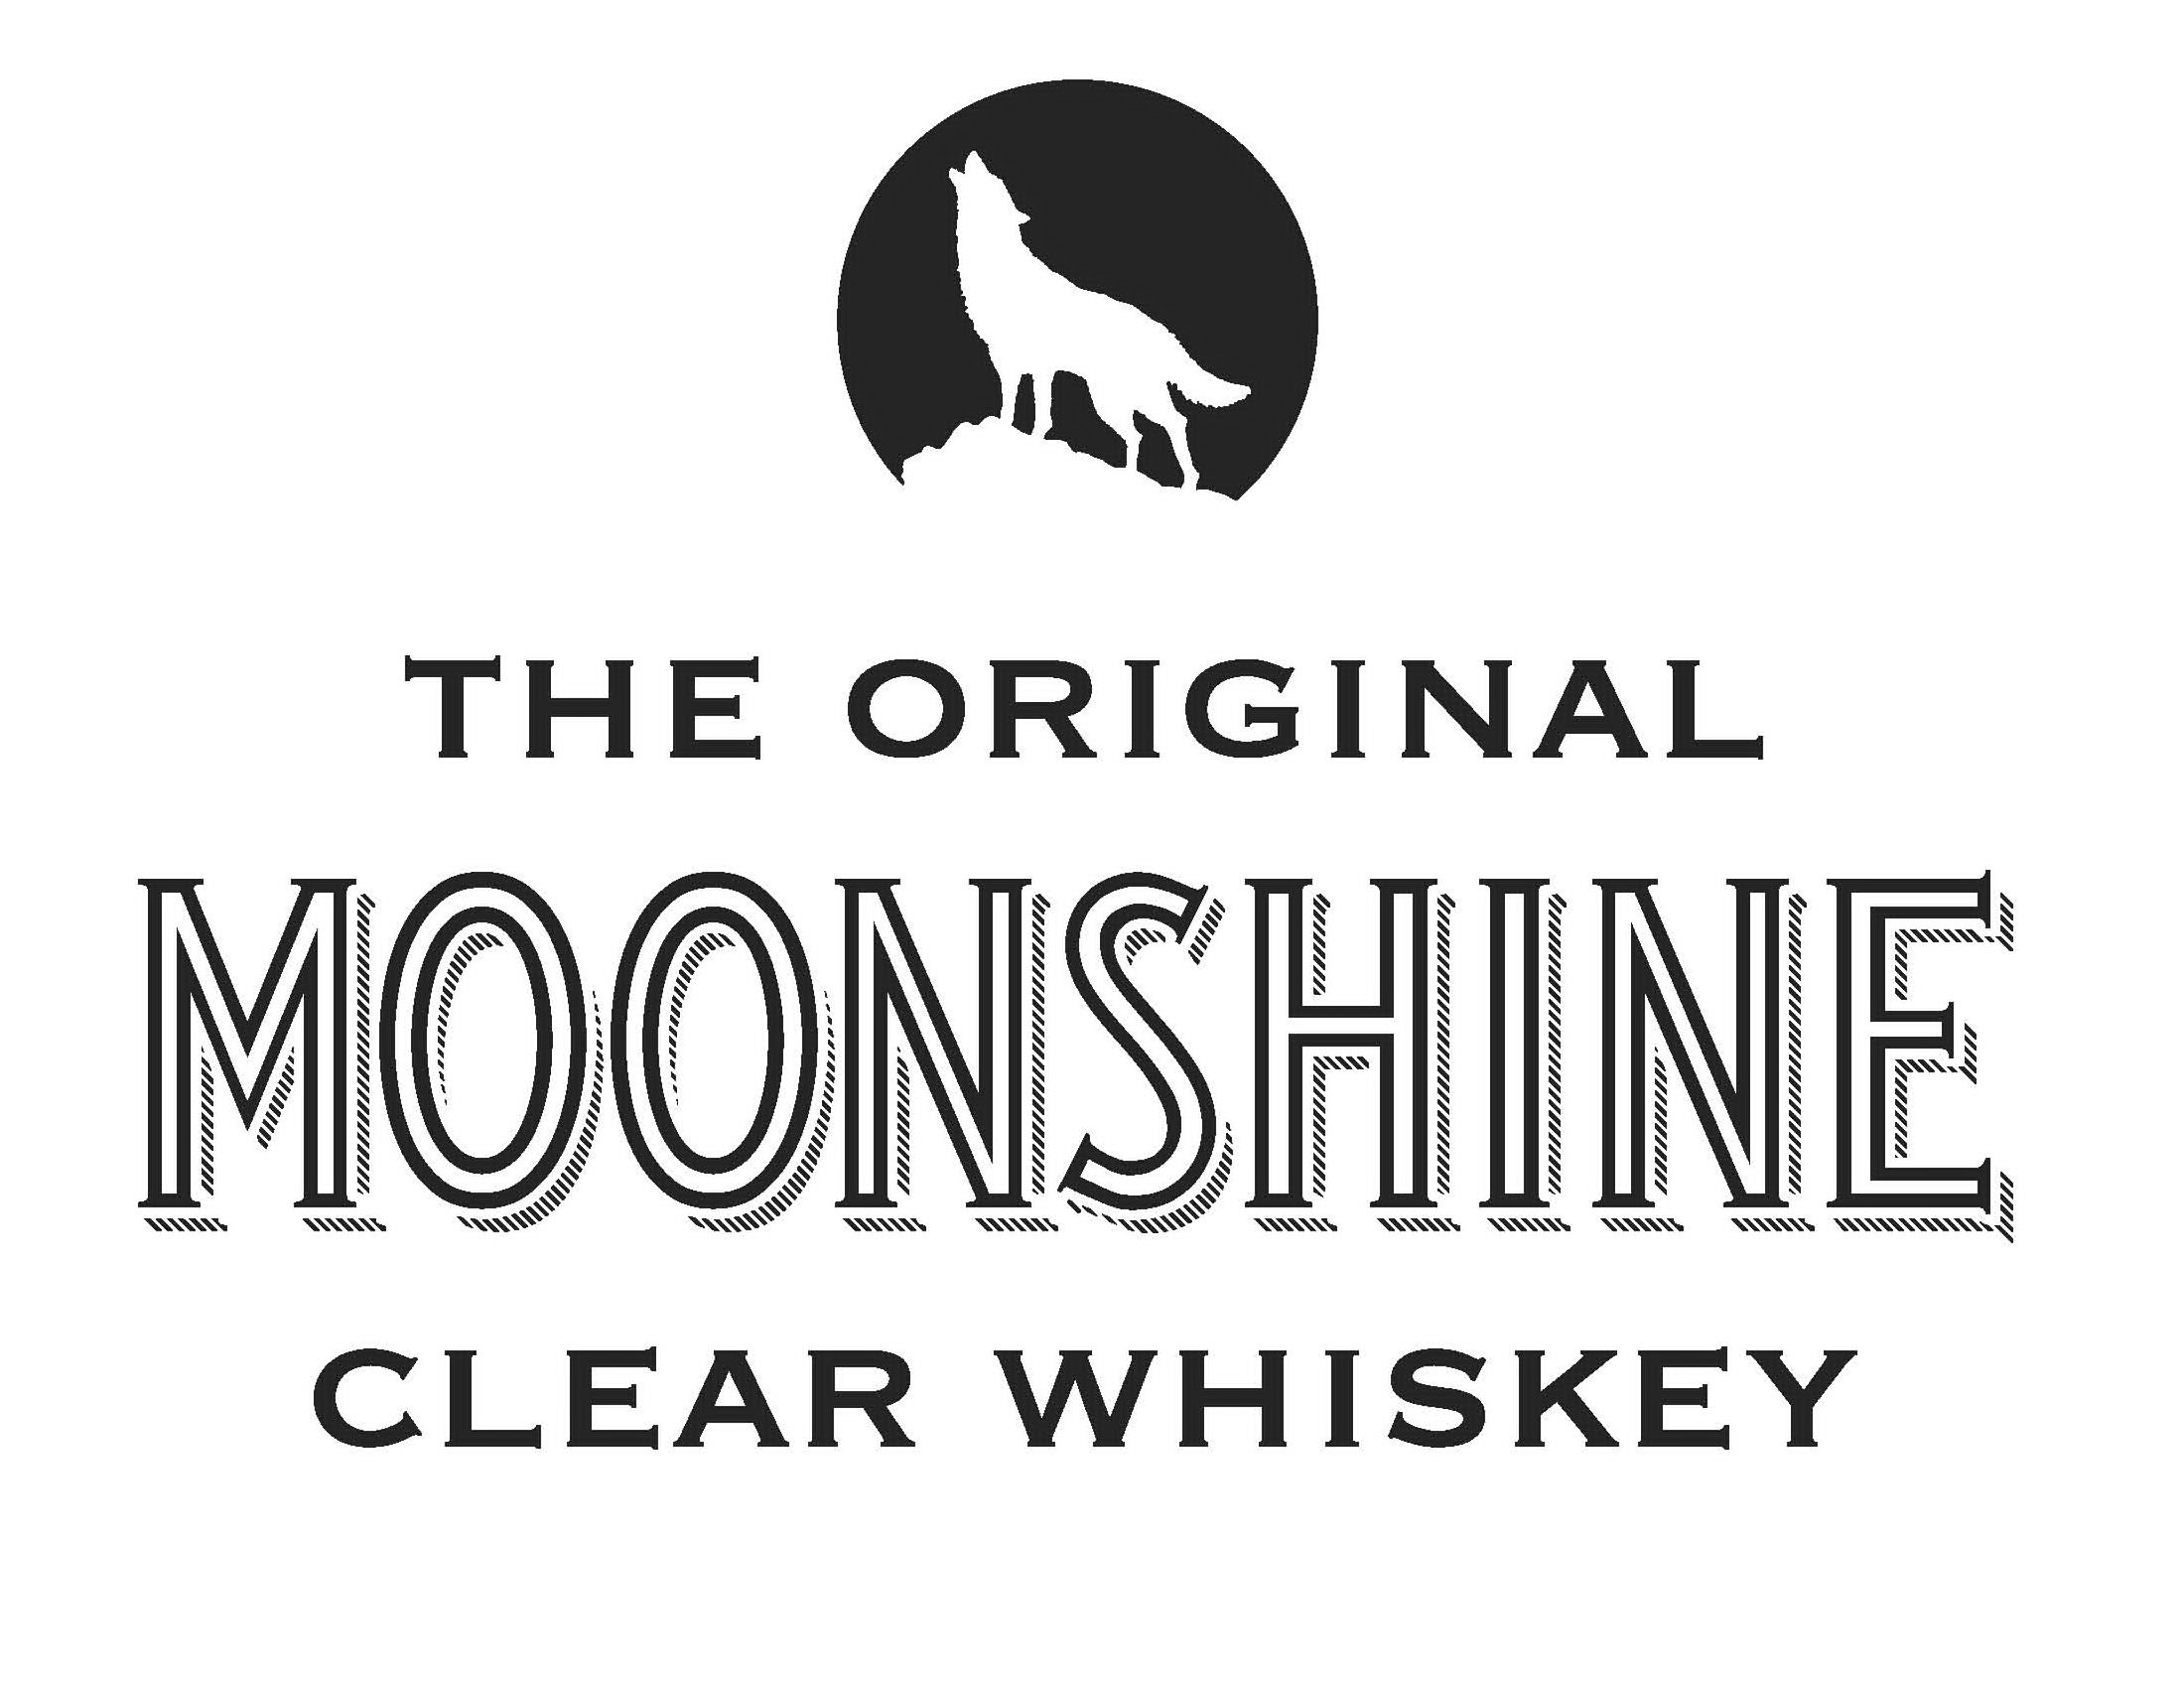  THE ORIGINAL MOONSHINE CLEAR WHISKEY